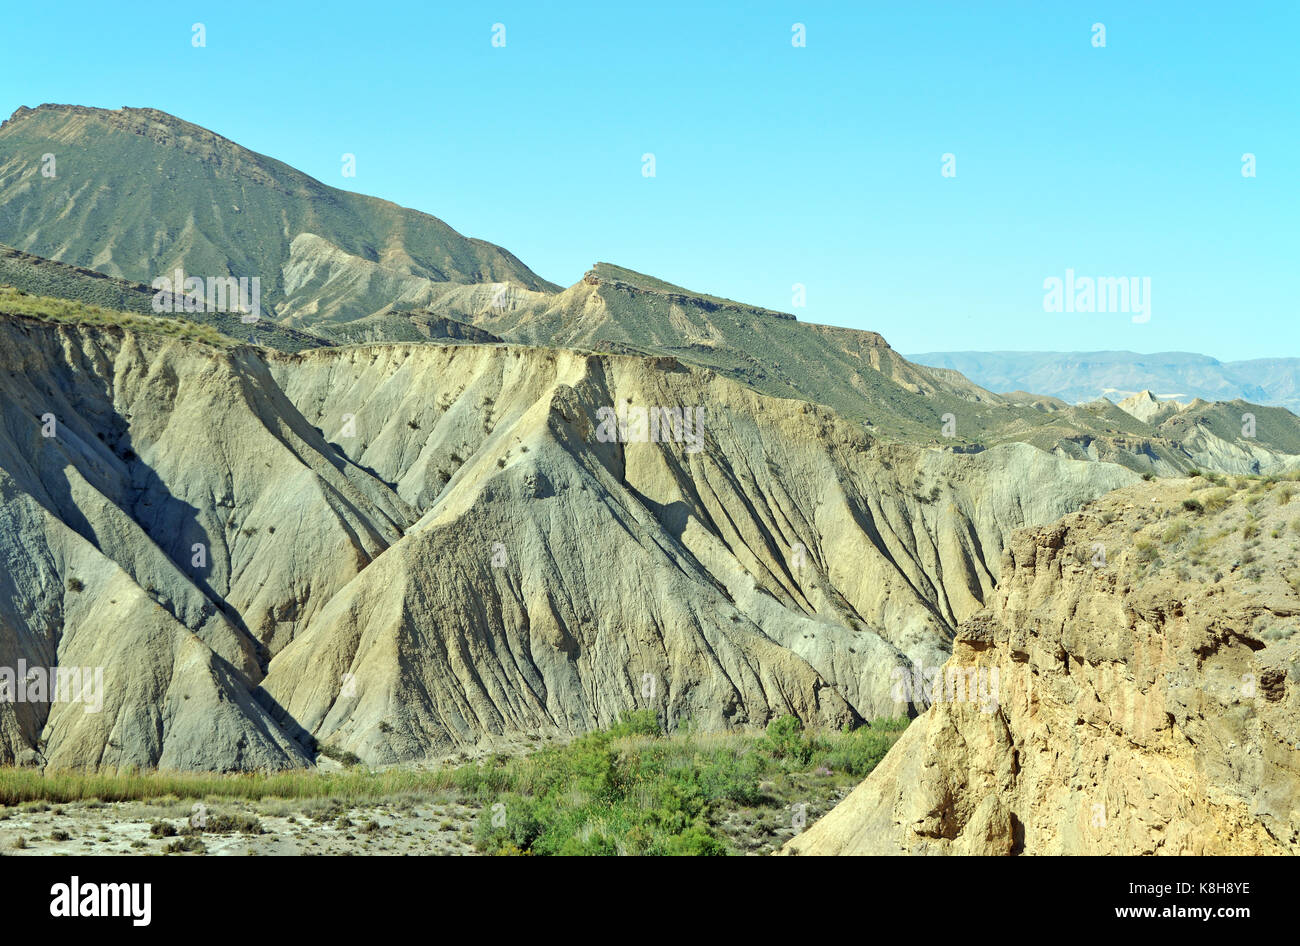 The Tabernas Desert is in the Spanish province of Almería. It is the driest region of Europe and the continent's only true desert climate. Stock Photo